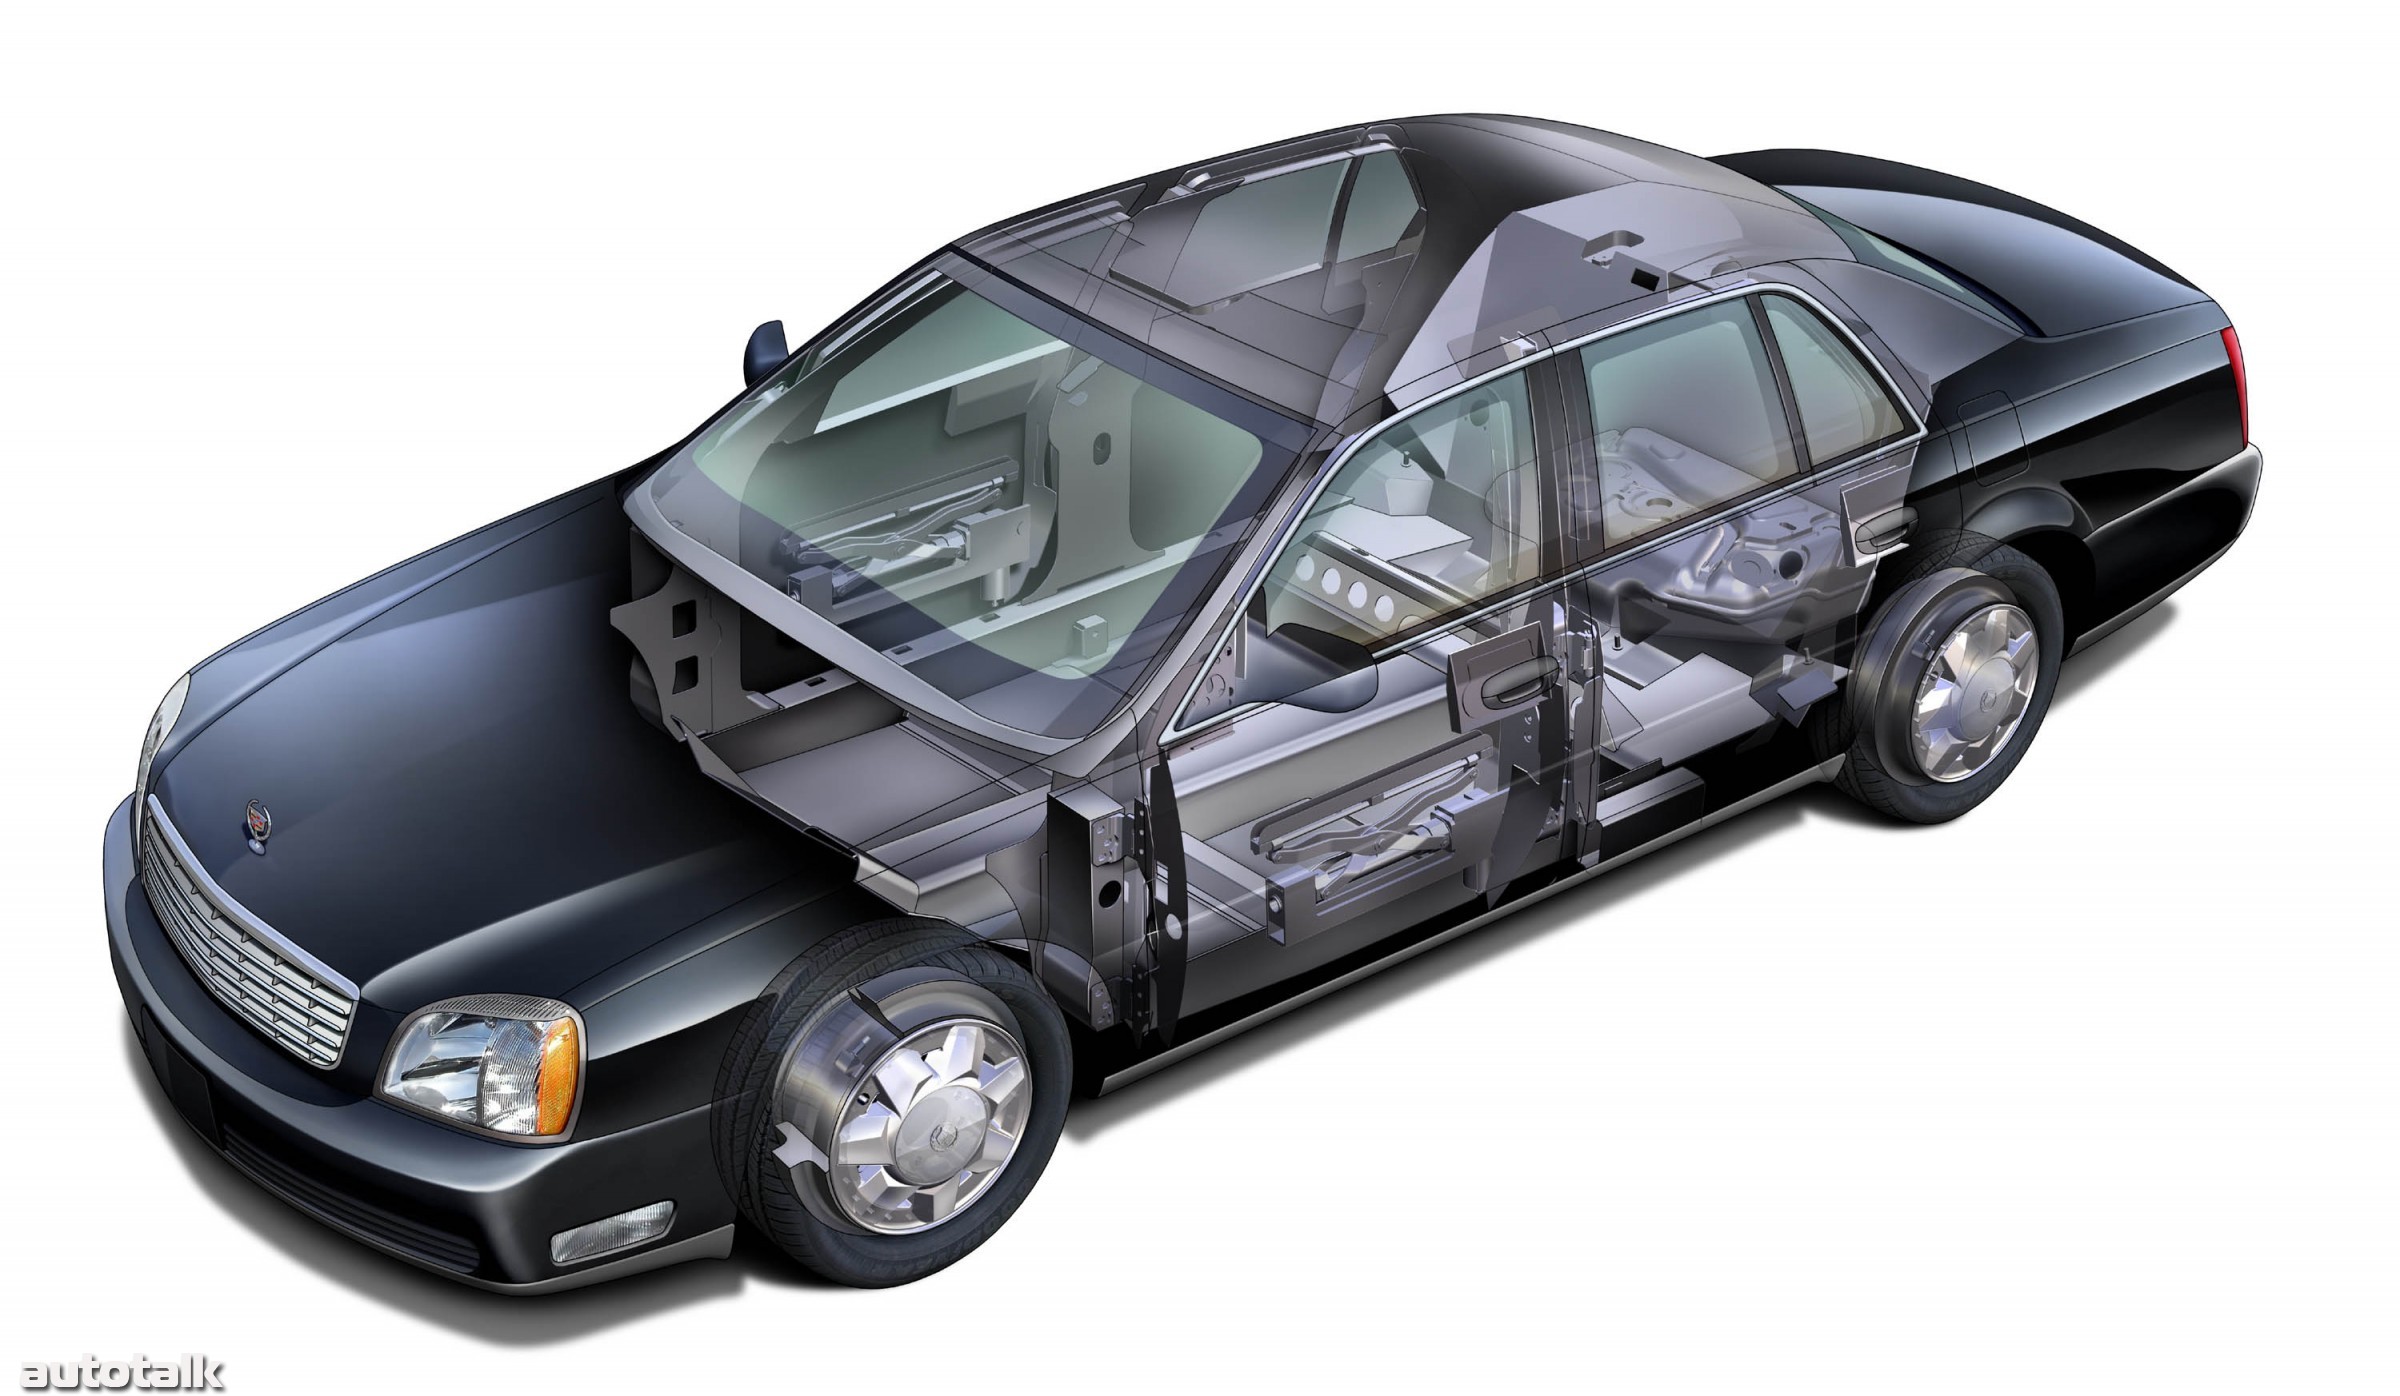 2004 Cadillac DeVille Armored